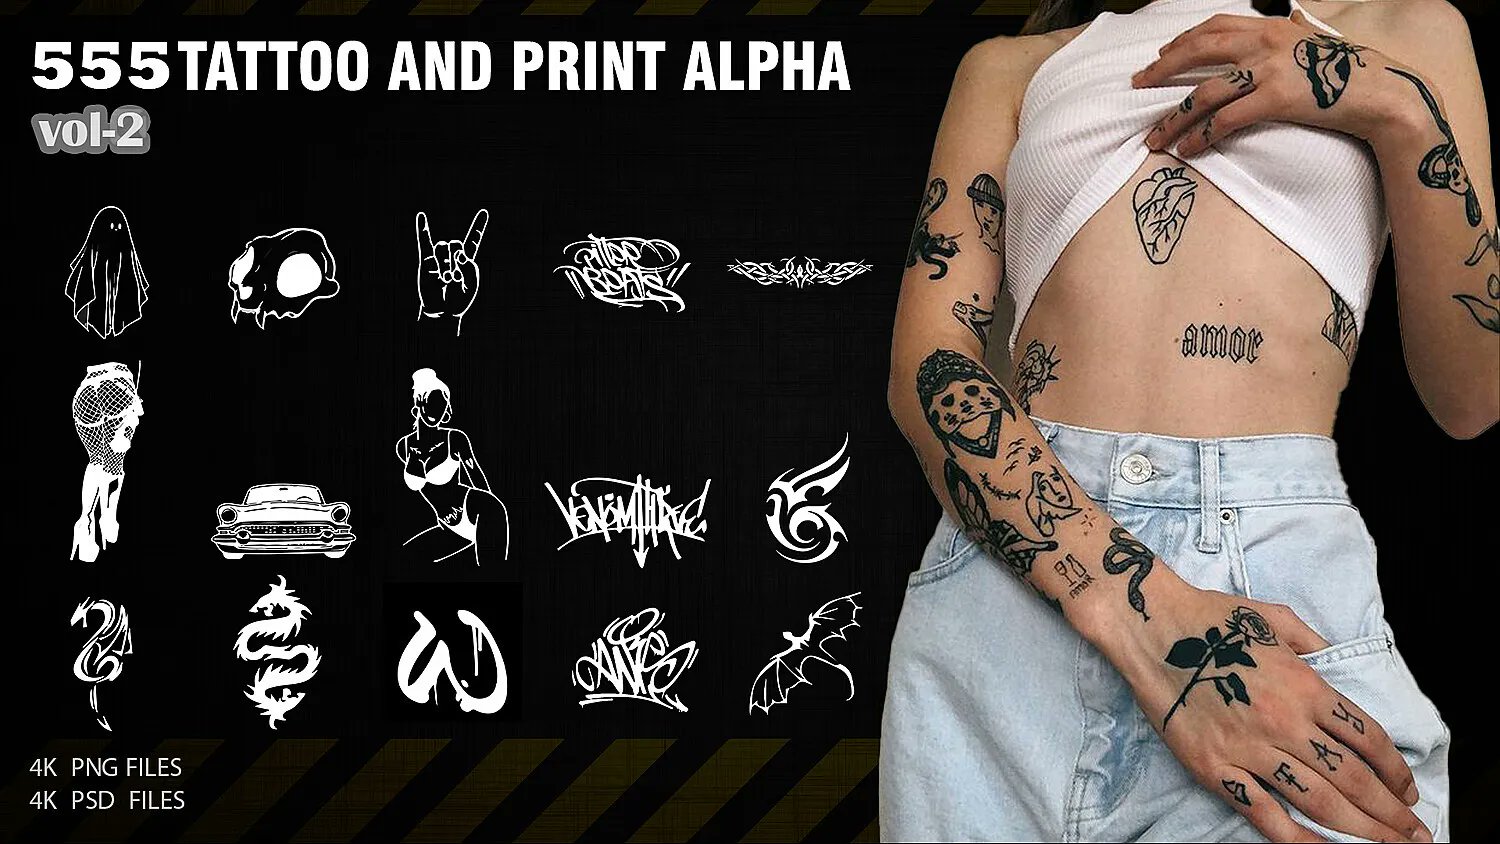 Cubebrush on X: "Looking for the perfect tattoos for your projects? This pack by SHAYESTEH comes with 555 #tattoo alphas in 4K. Easily adjust designs to your liking! https://t.co/RS2TeNEY5Z #digitalart #gameassets #digitalartist #